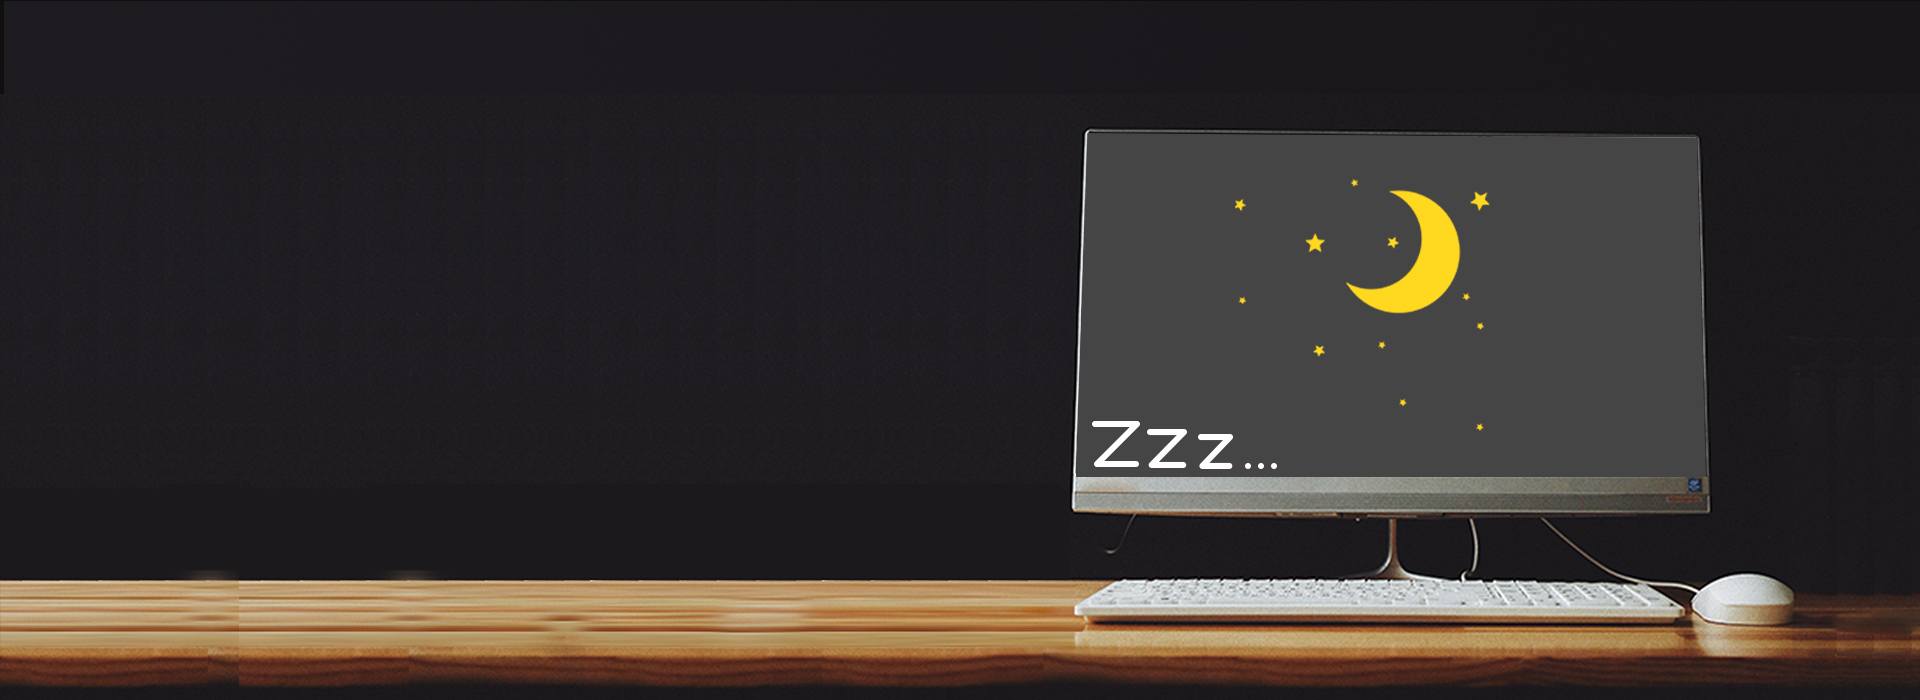 How To Wake Up A Computer From Sleep